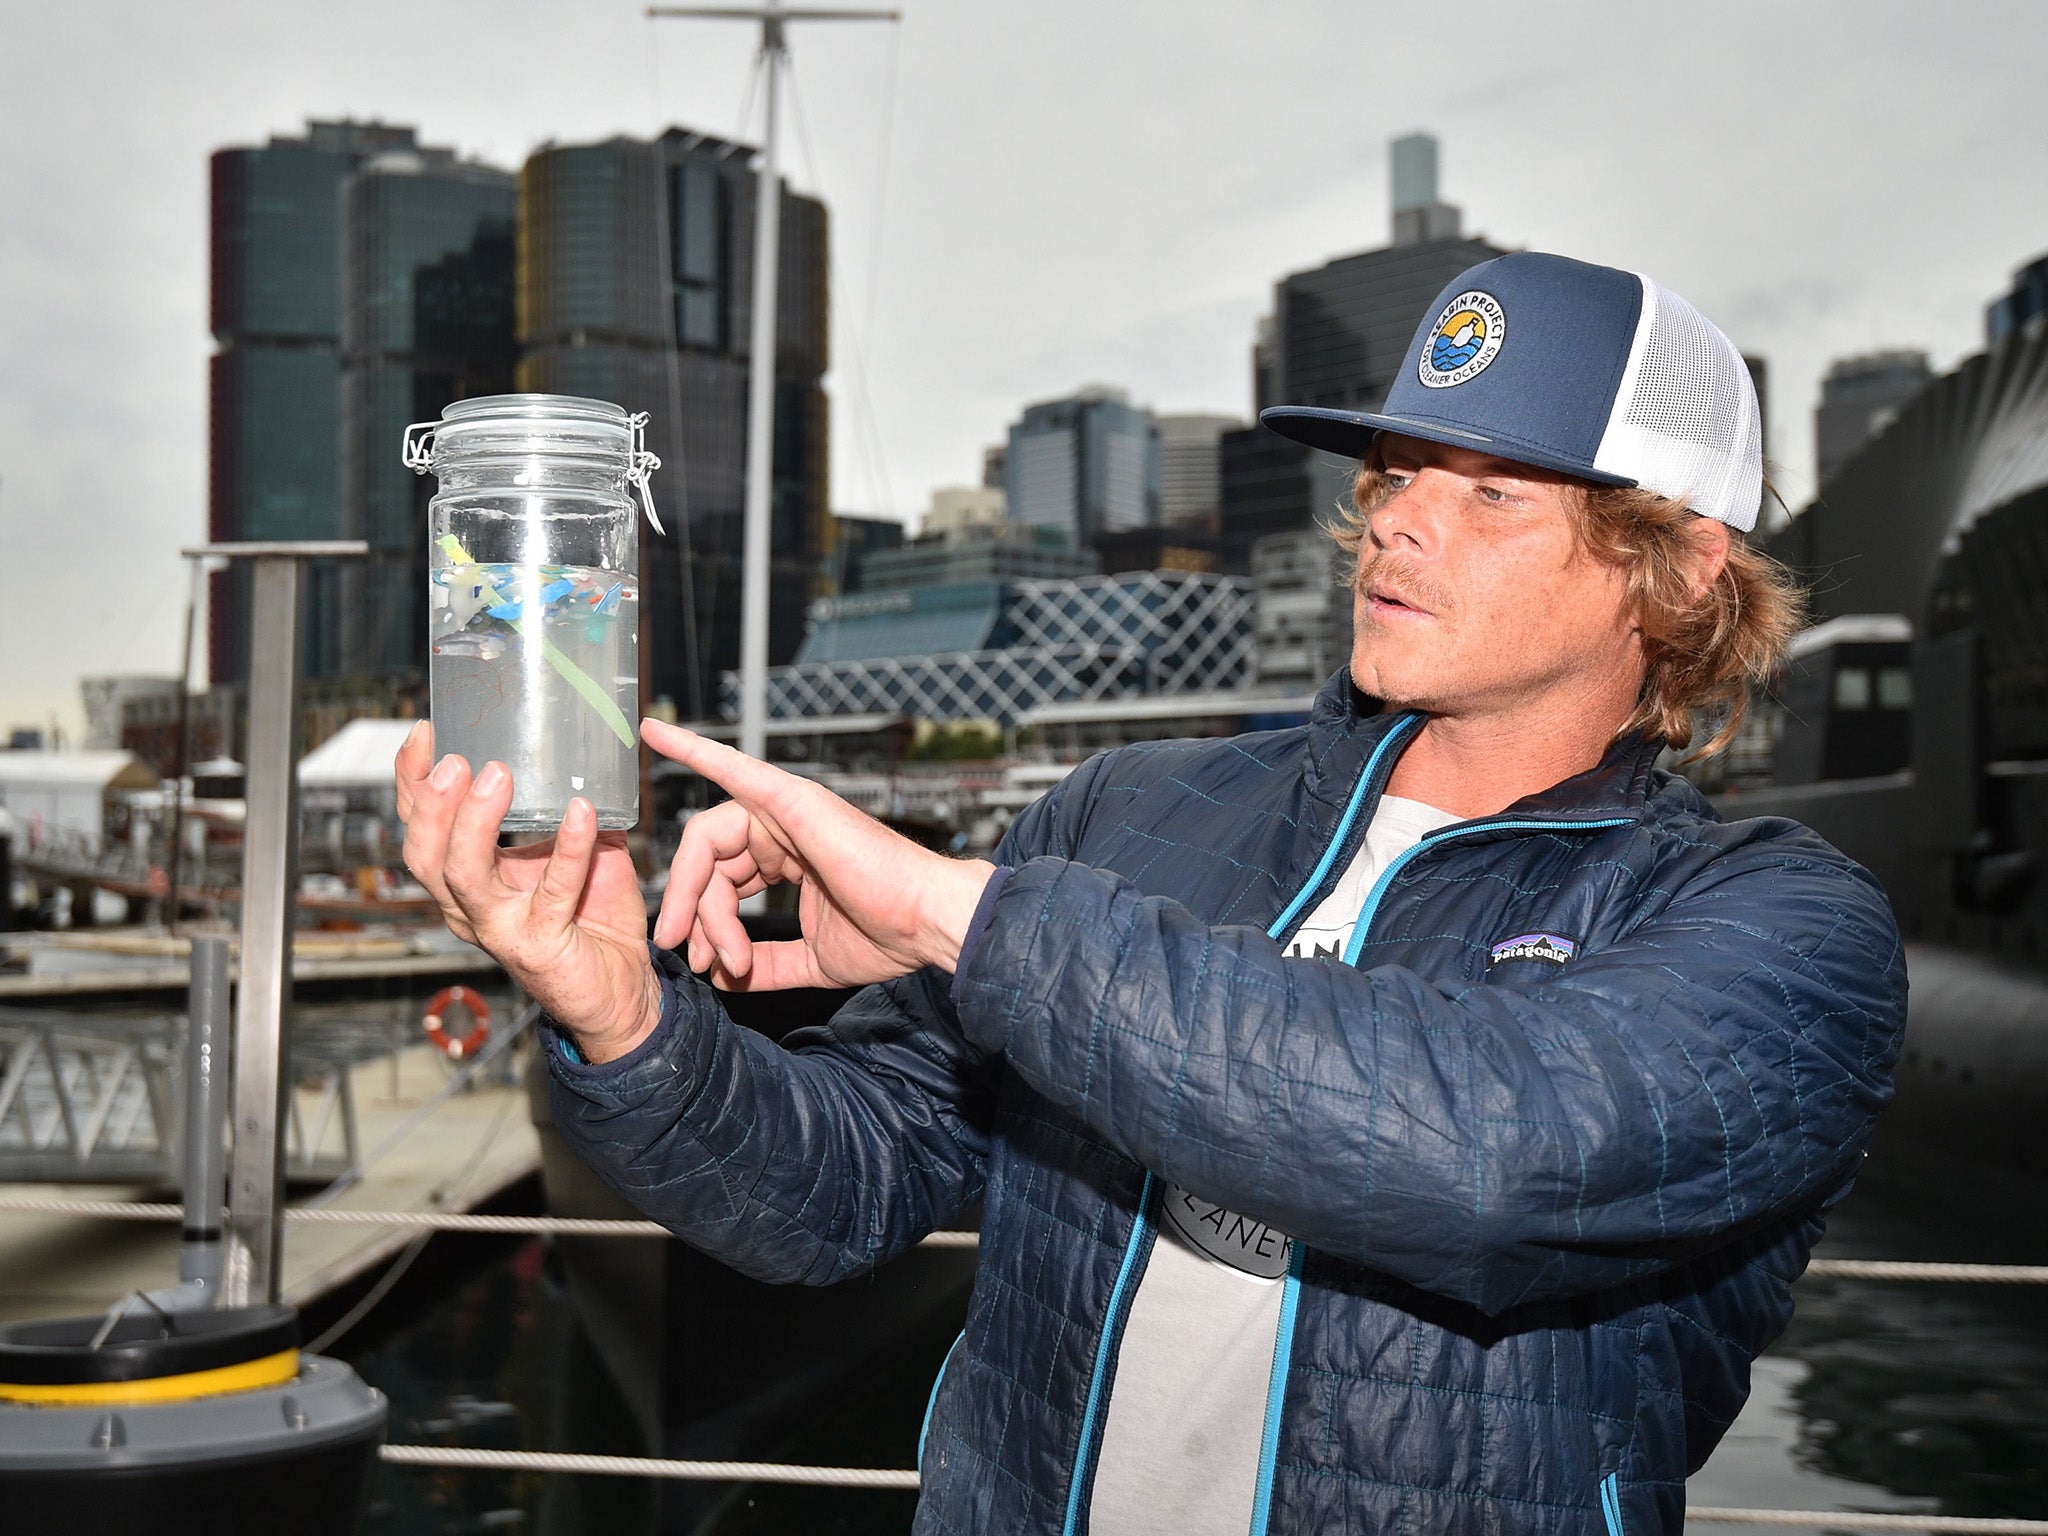 Pete Ceglinski, CEO and co-founder of Seabin Project, displays microplastics collected in the 'seabin' which sucks in rubbish from the water